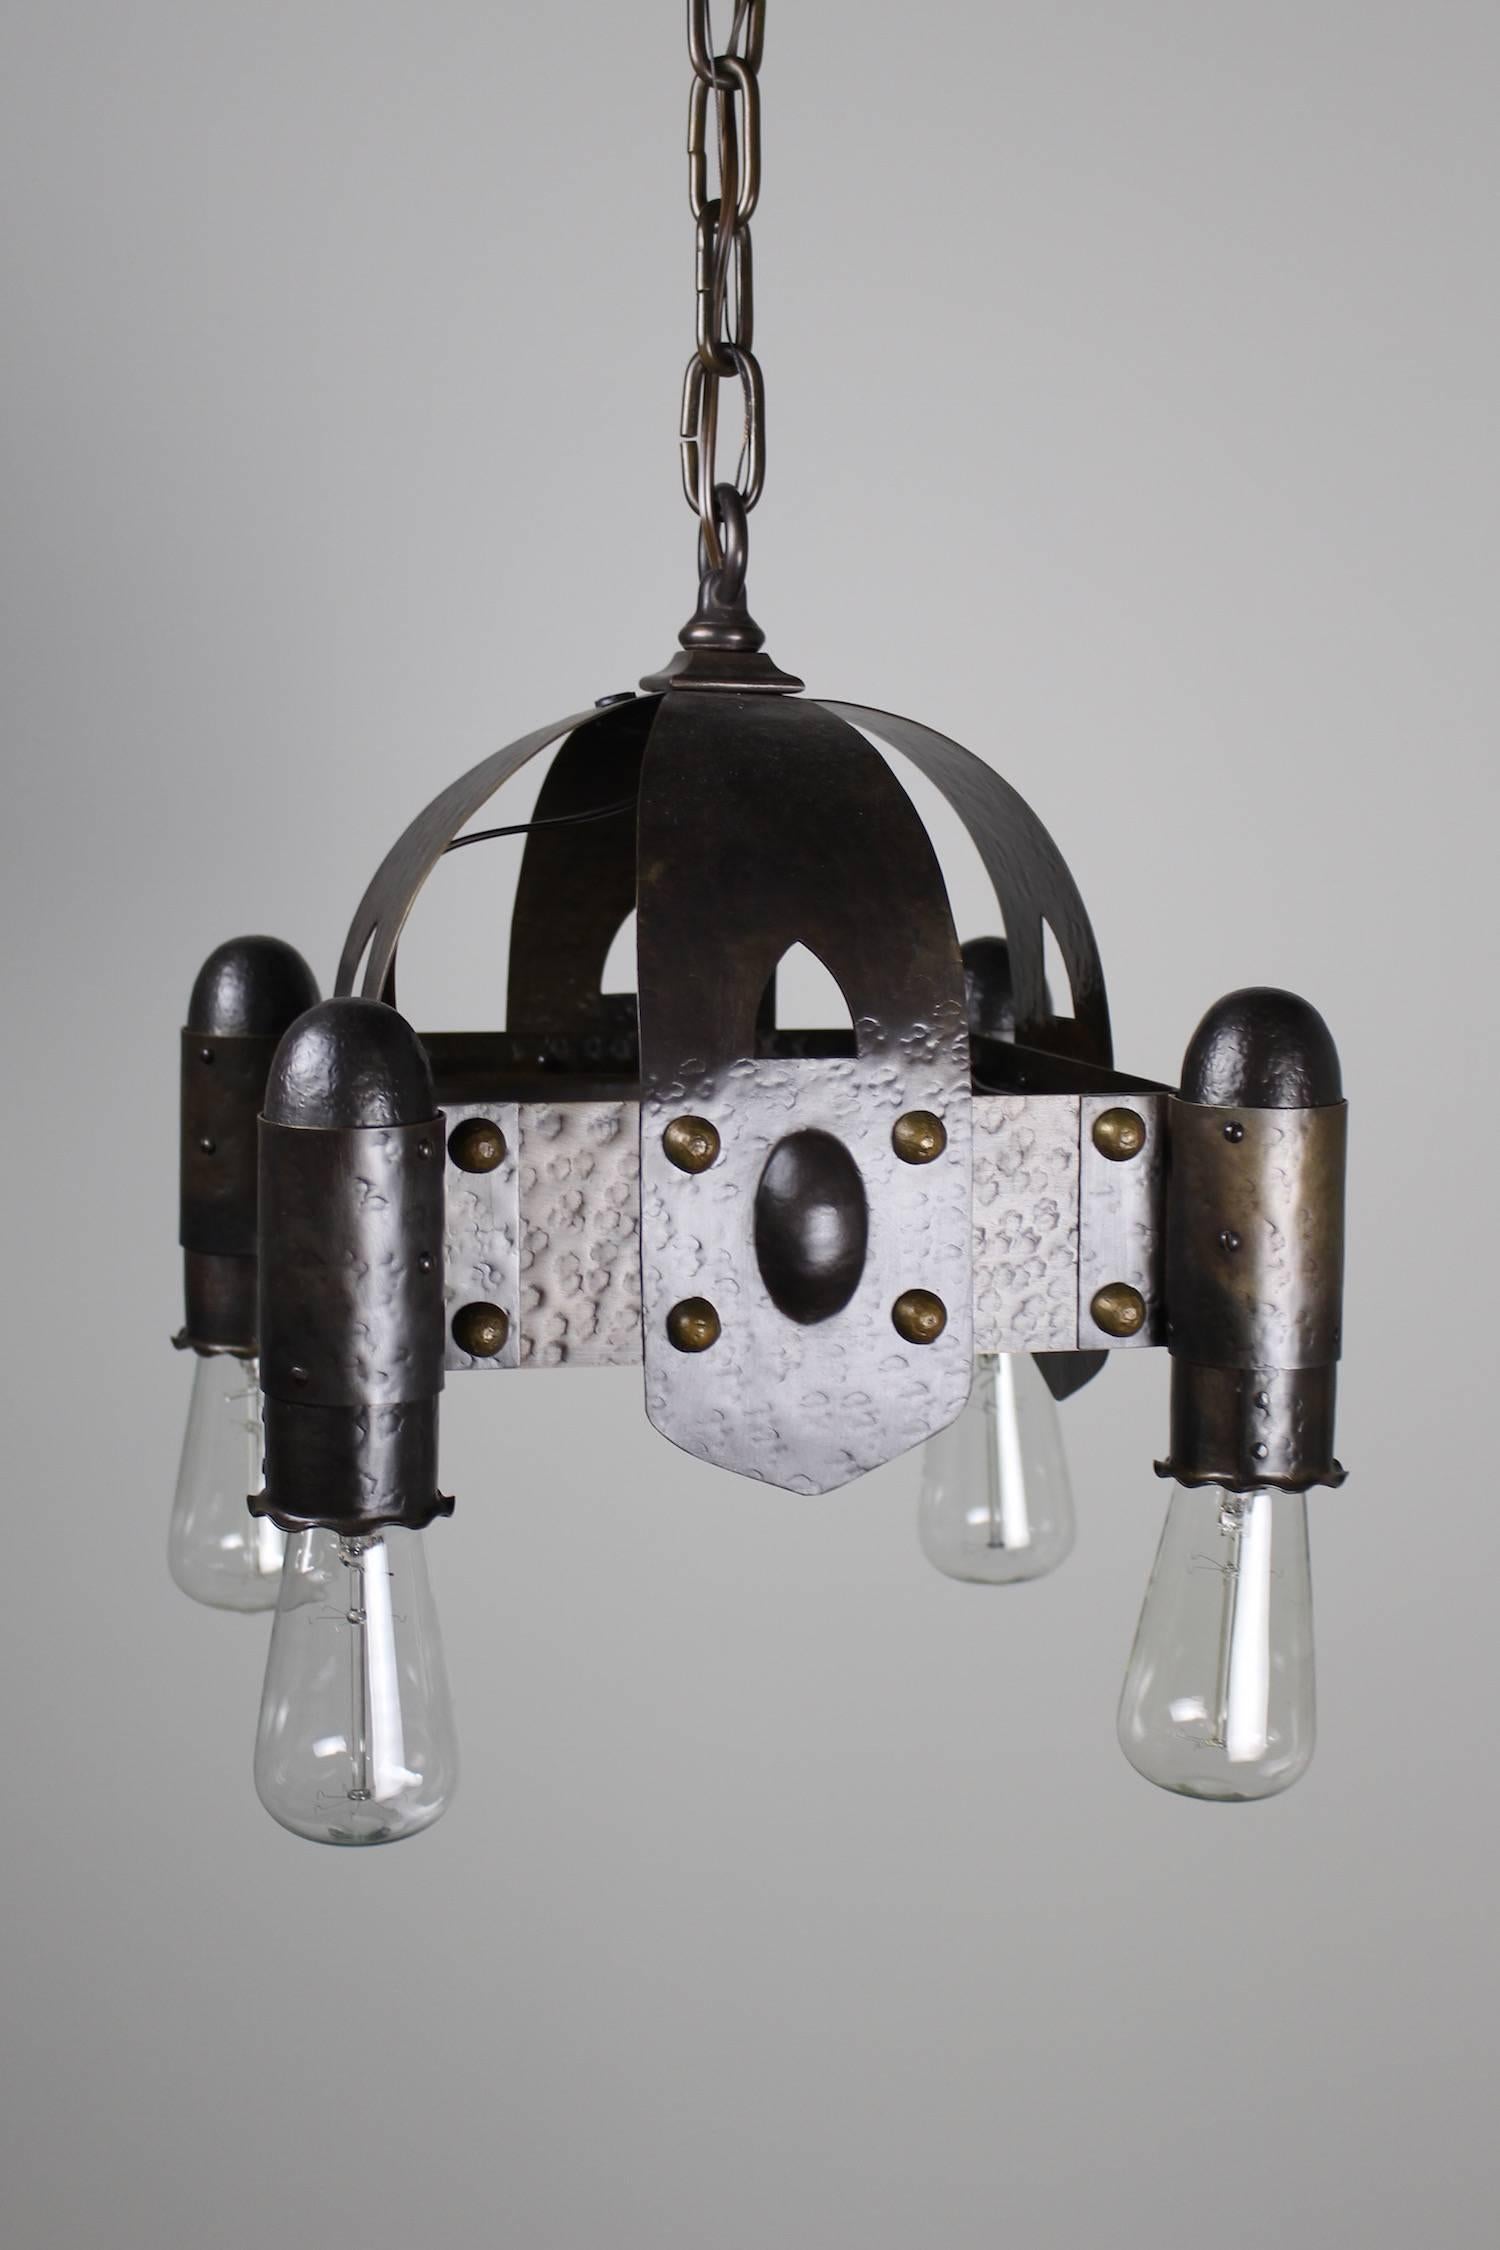 Hammered Brass Arts & Crafts Four-Light Fixture In Excellent Condition For Sale In Vancouver, BC